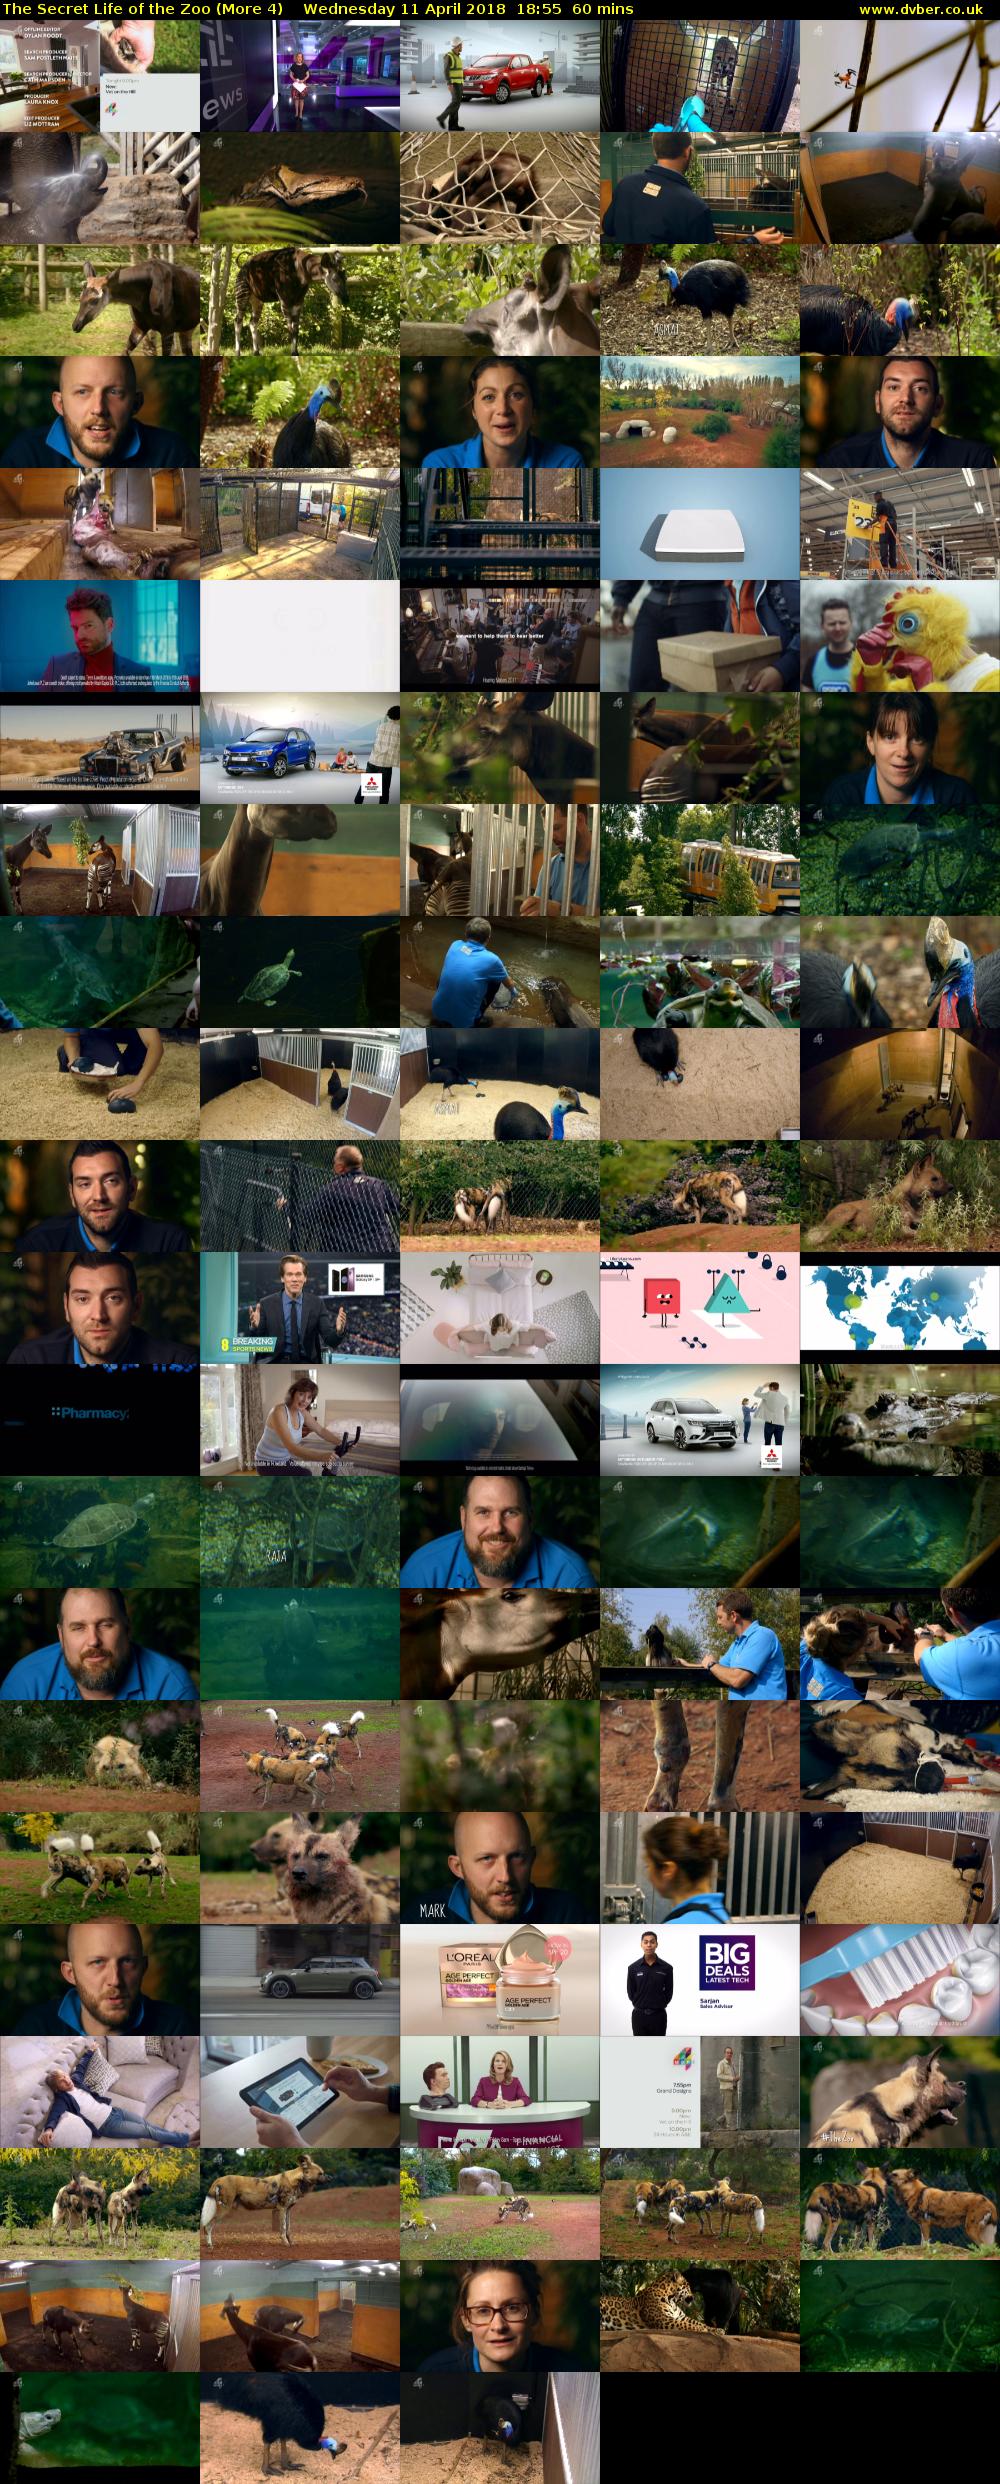 The Secret Life of the Zoo (More 4) Wednesday 11 April 2018 18:55 - 19:55